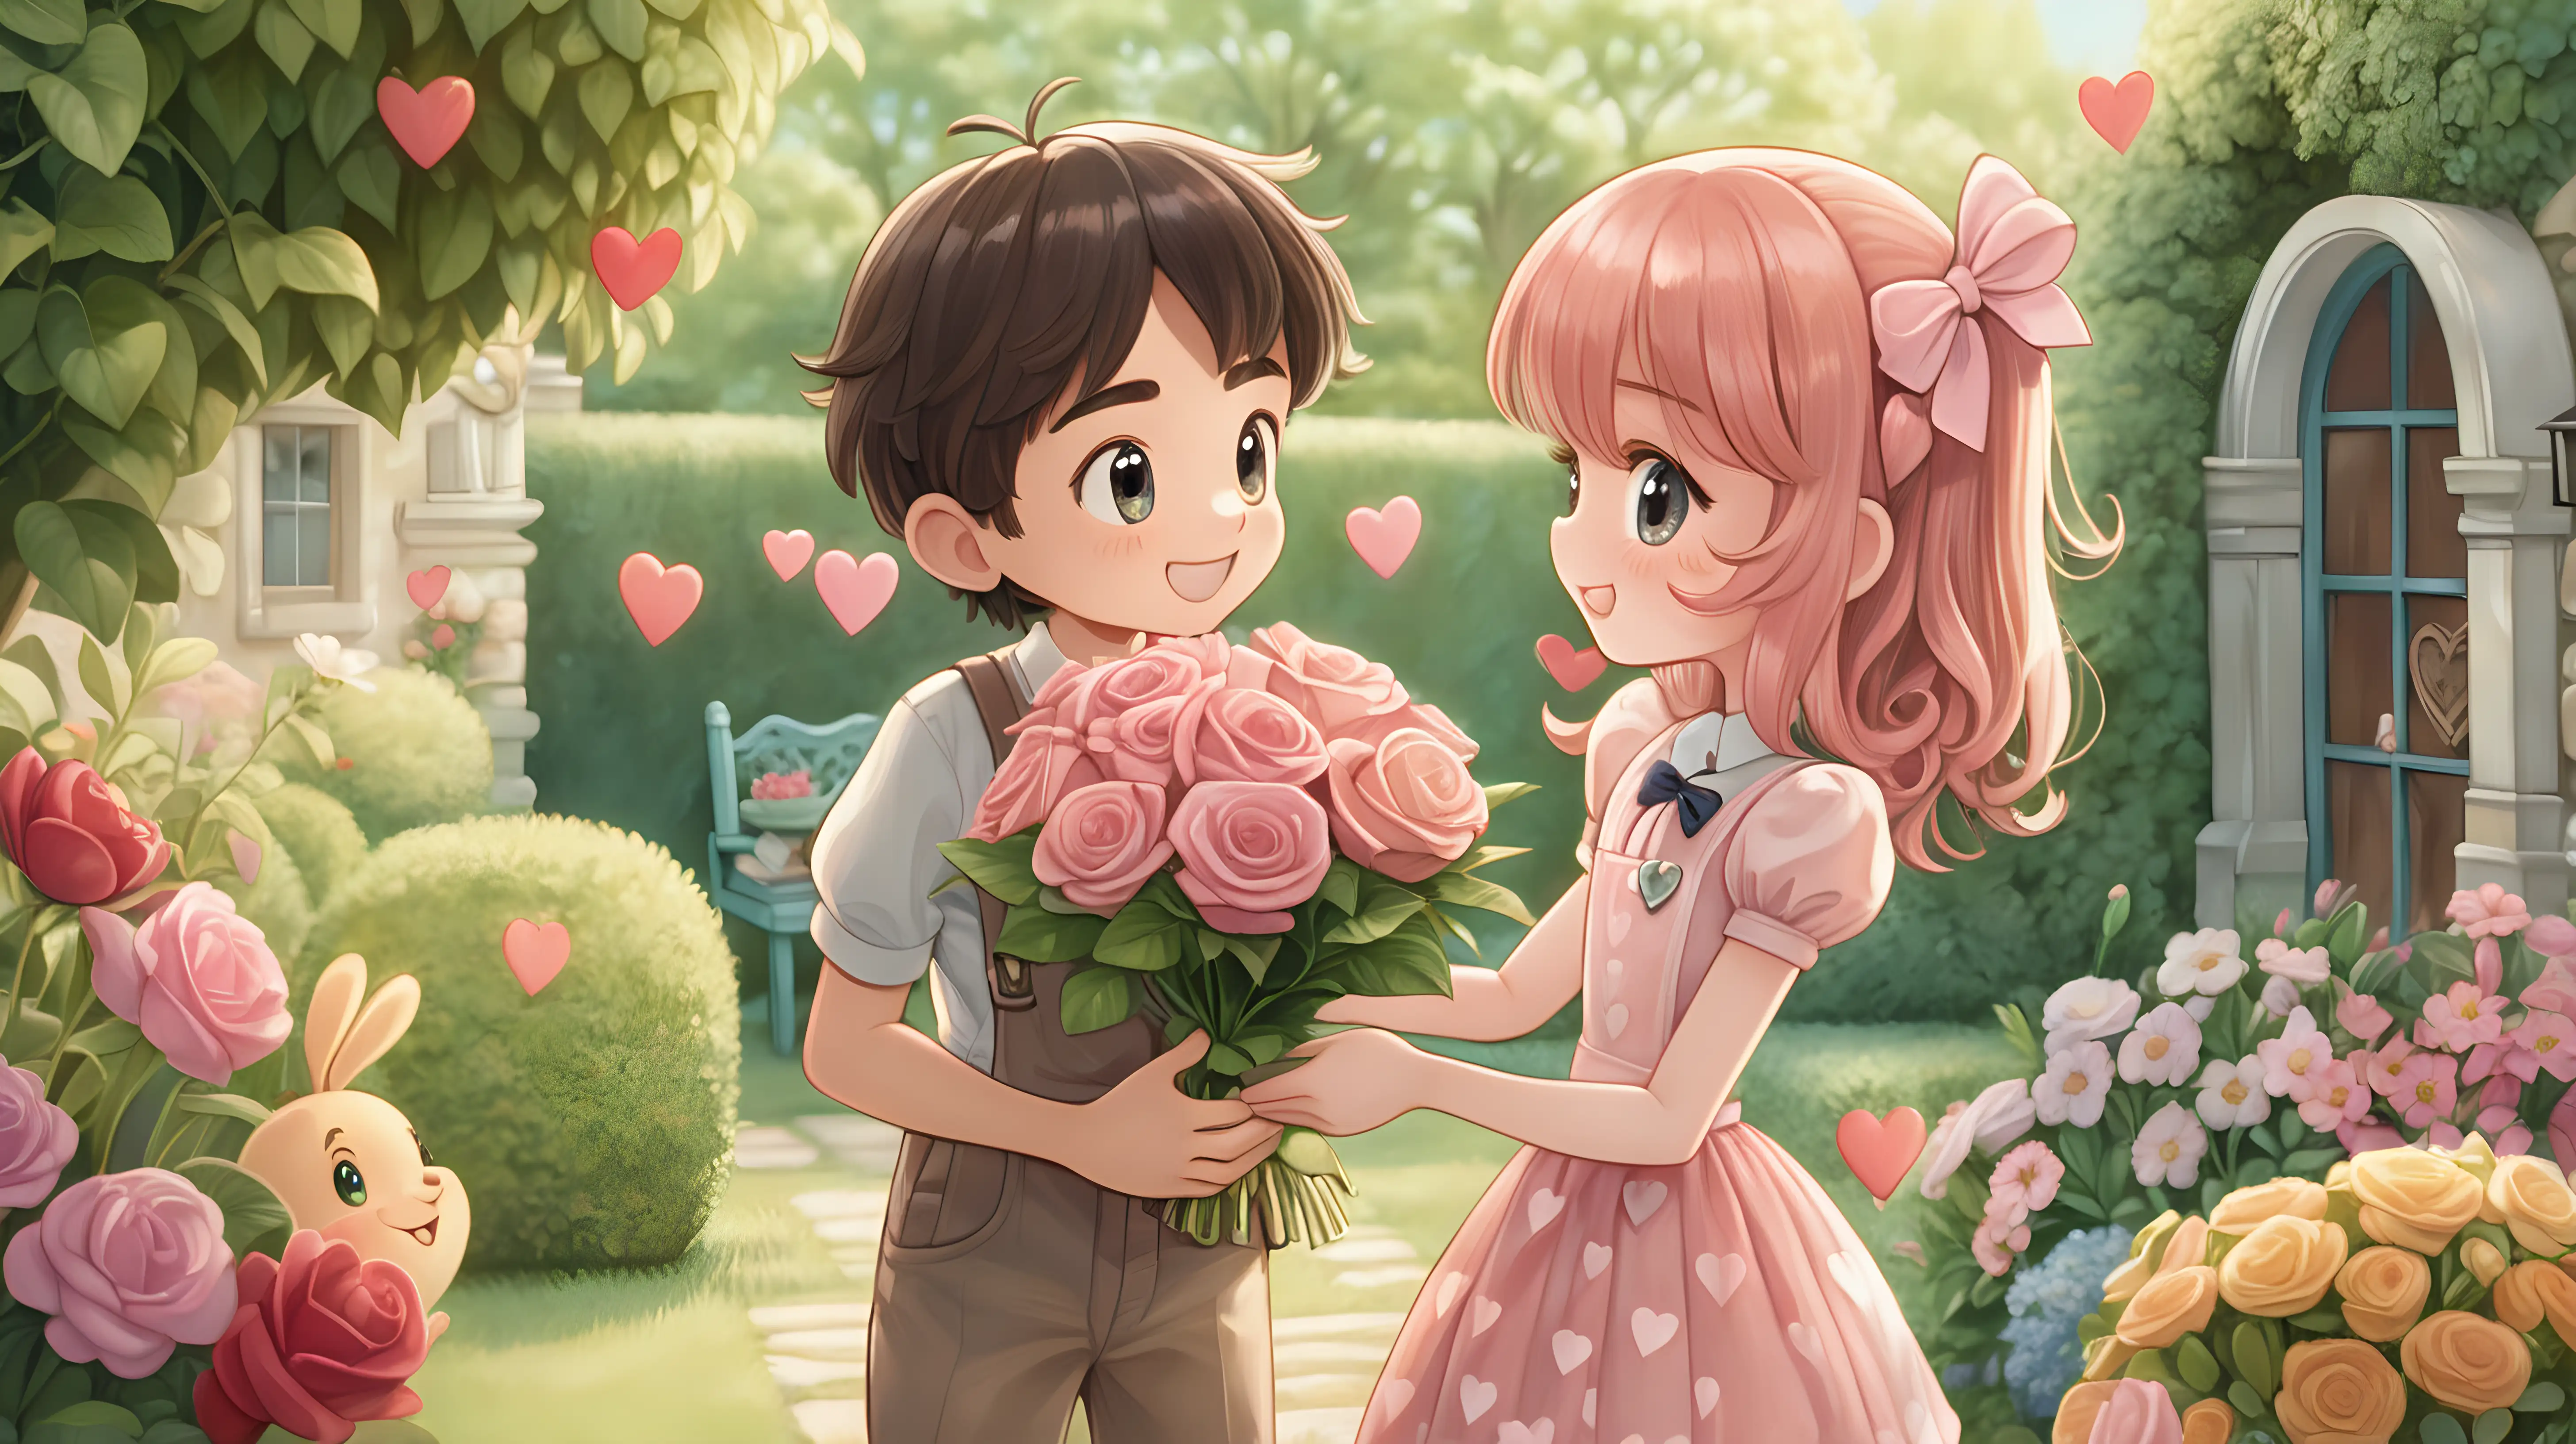 An adorable character handing a heart-shaped bouquet to a blushing girl in a charming garden.